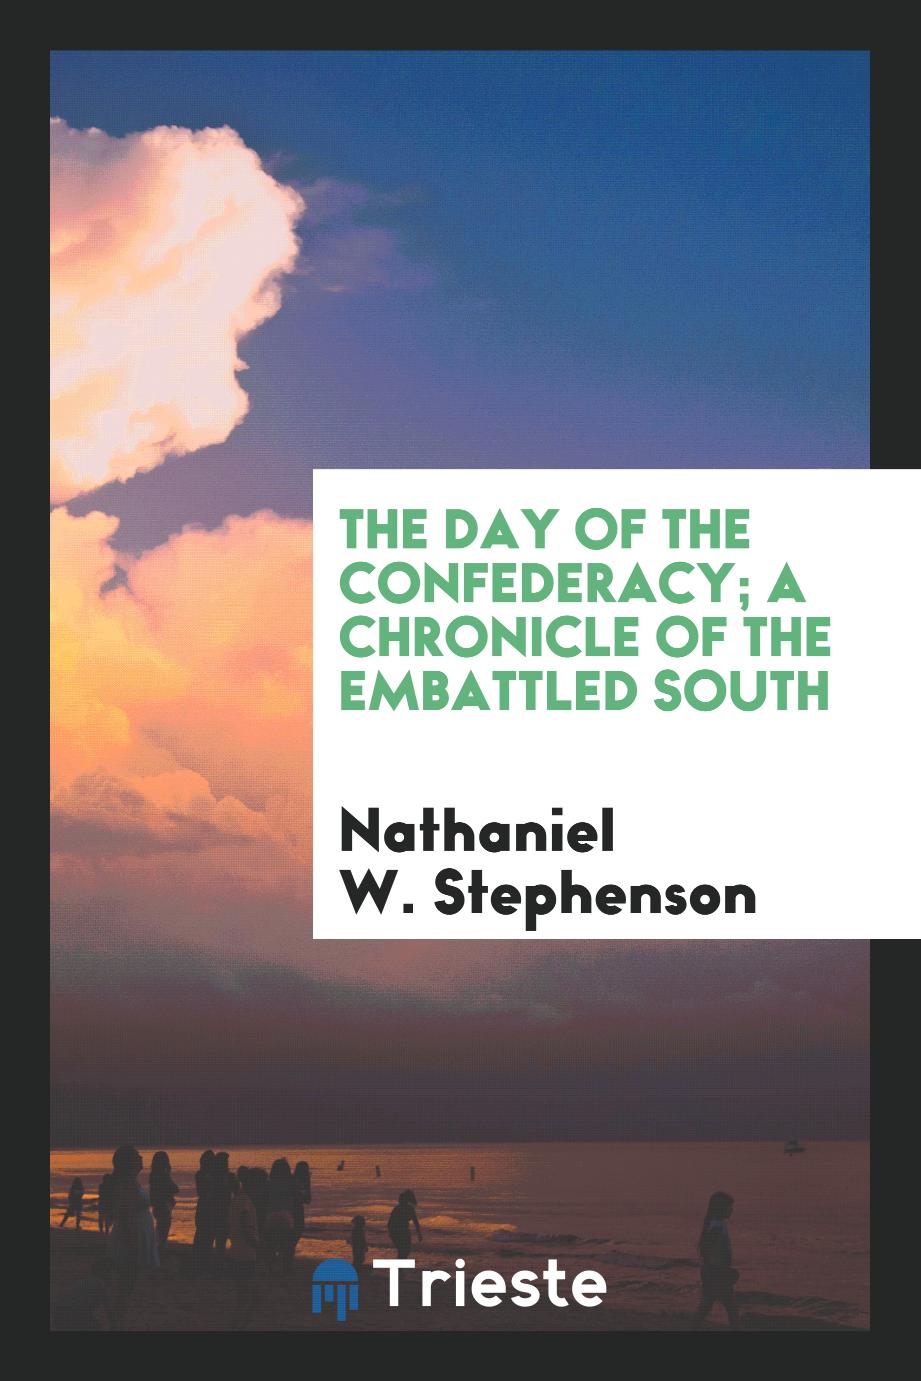 The day of the confederacy; a chronicle of the embattled South